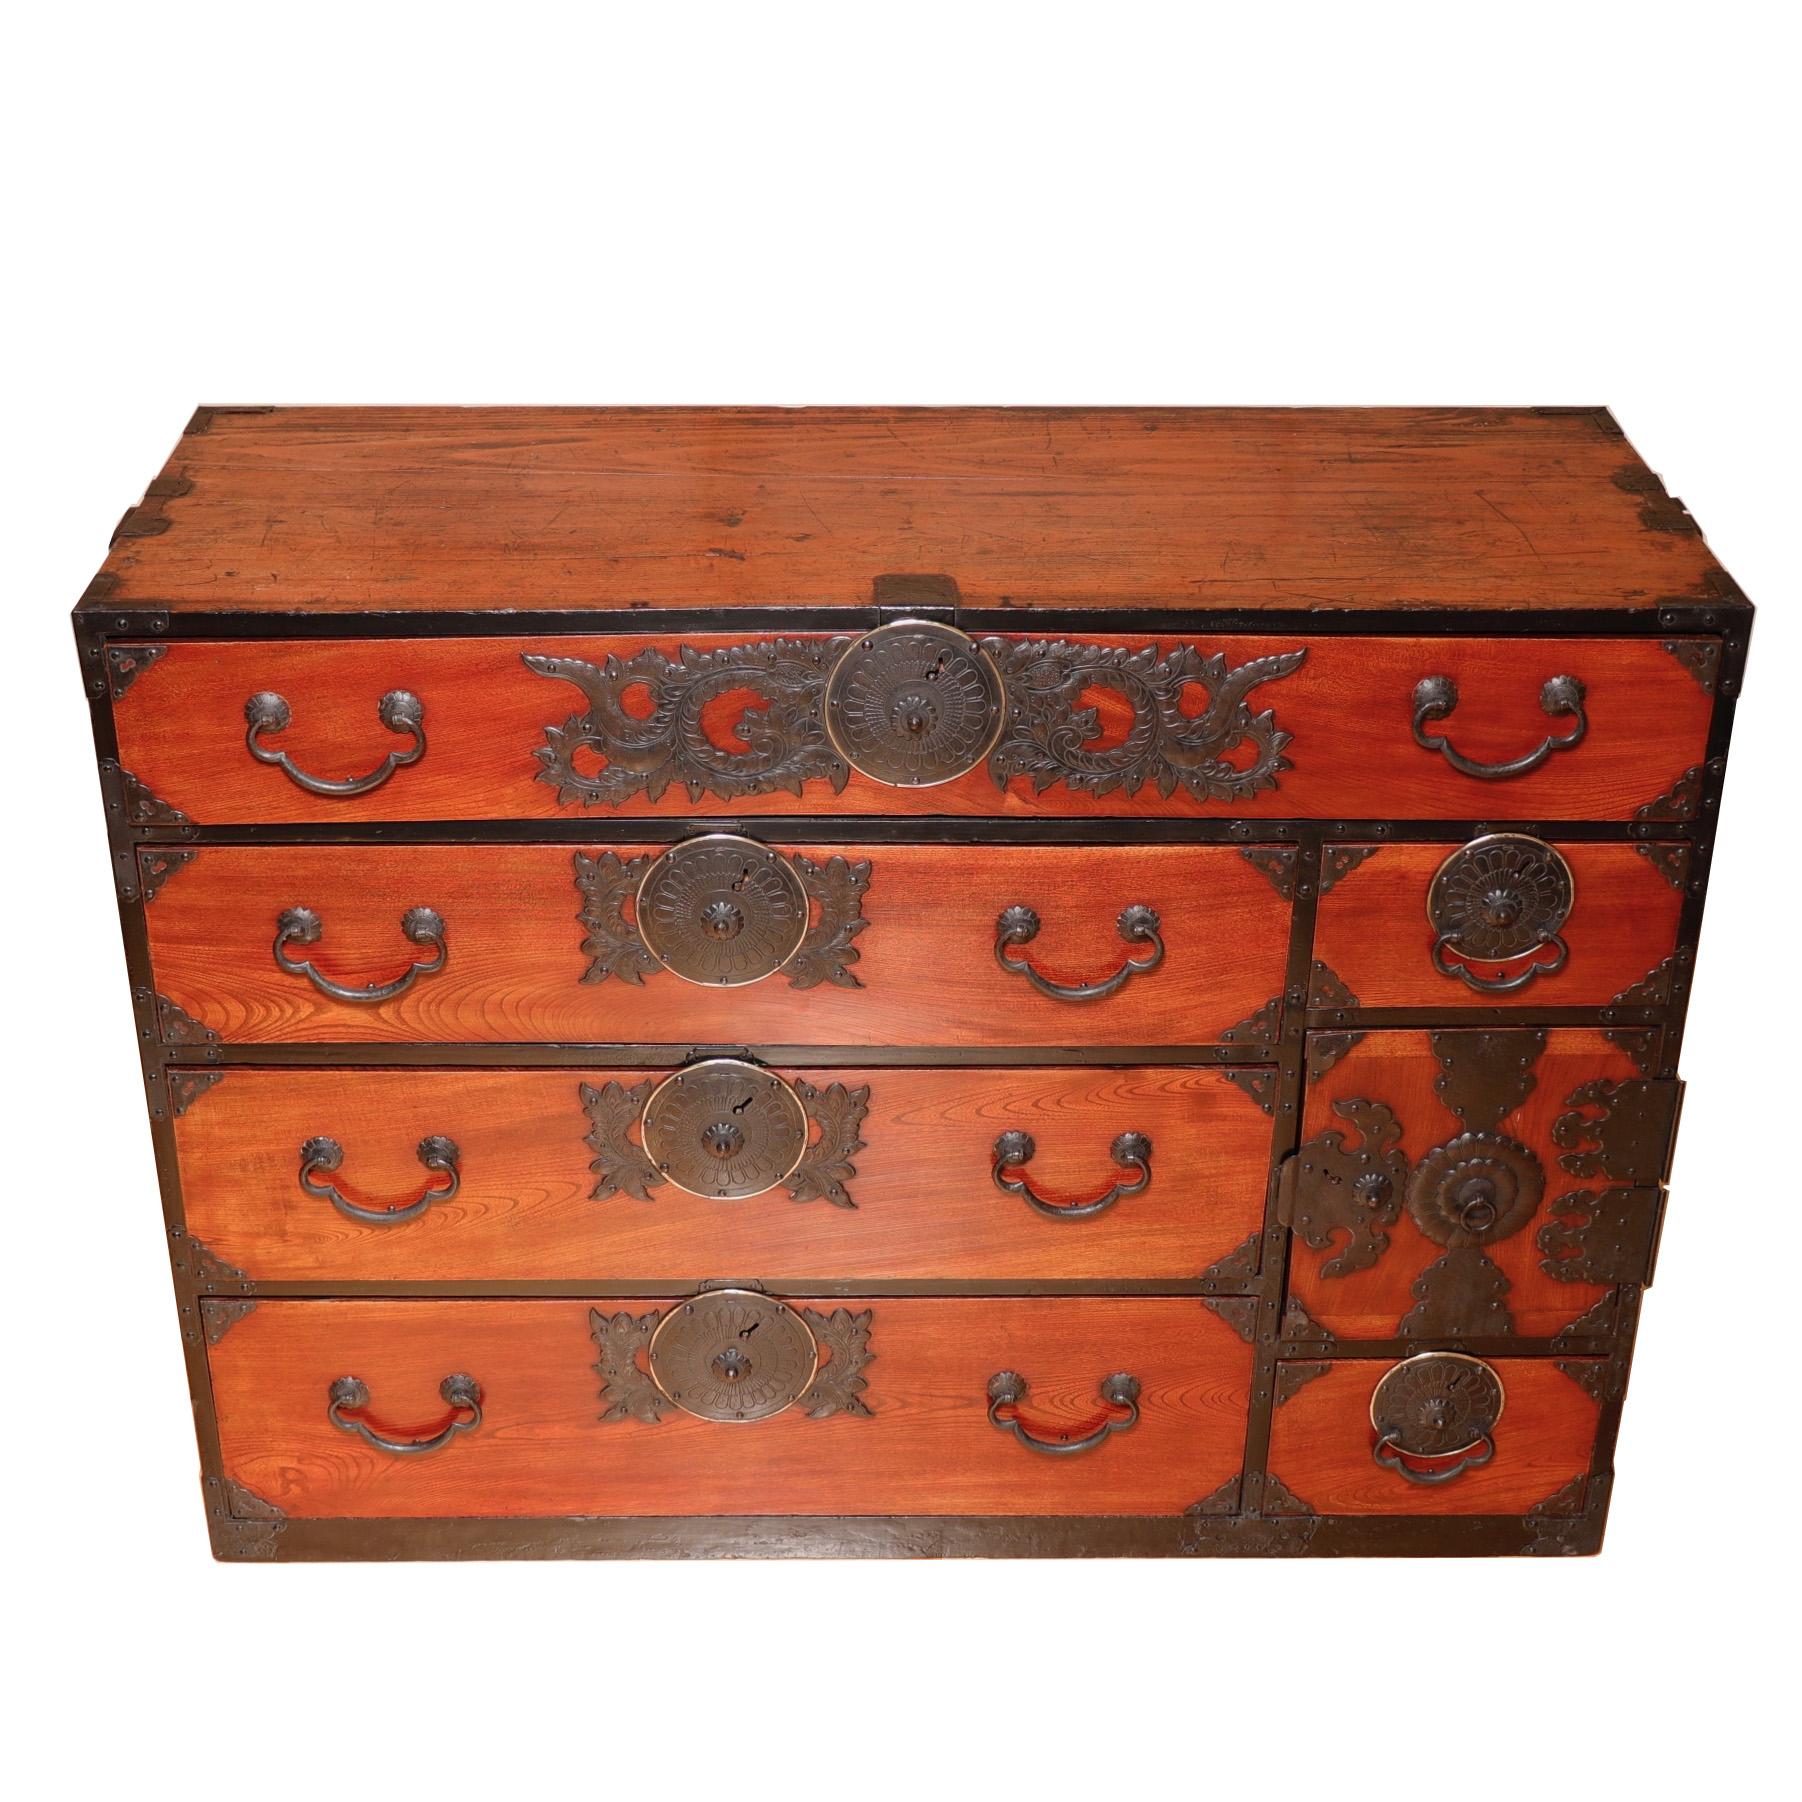 Japanese Isho Yaro-dansu (single section clothing storage chest) from Sendai, constructed of hinoki (Japanese Cypress) with keyaki (Zelkova) drawer fronts finished in a rich reddish hand-rubbed kijiro lacquer with heavy iron hardware, melon shaped